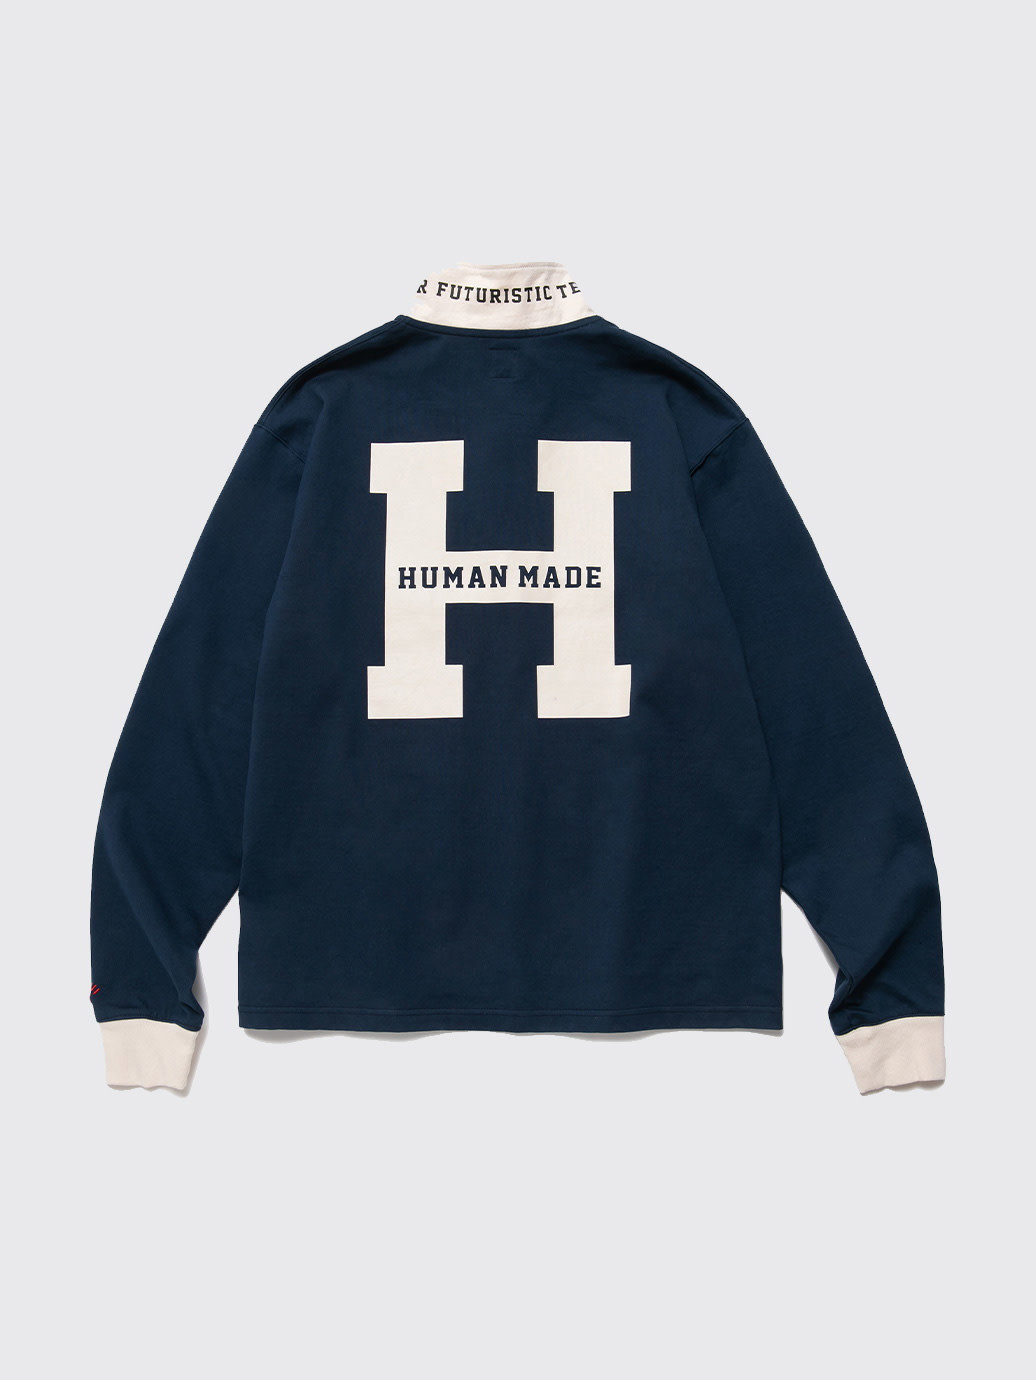 Human Made Rugby Shirt #1 FW22 Navy - OALLERY